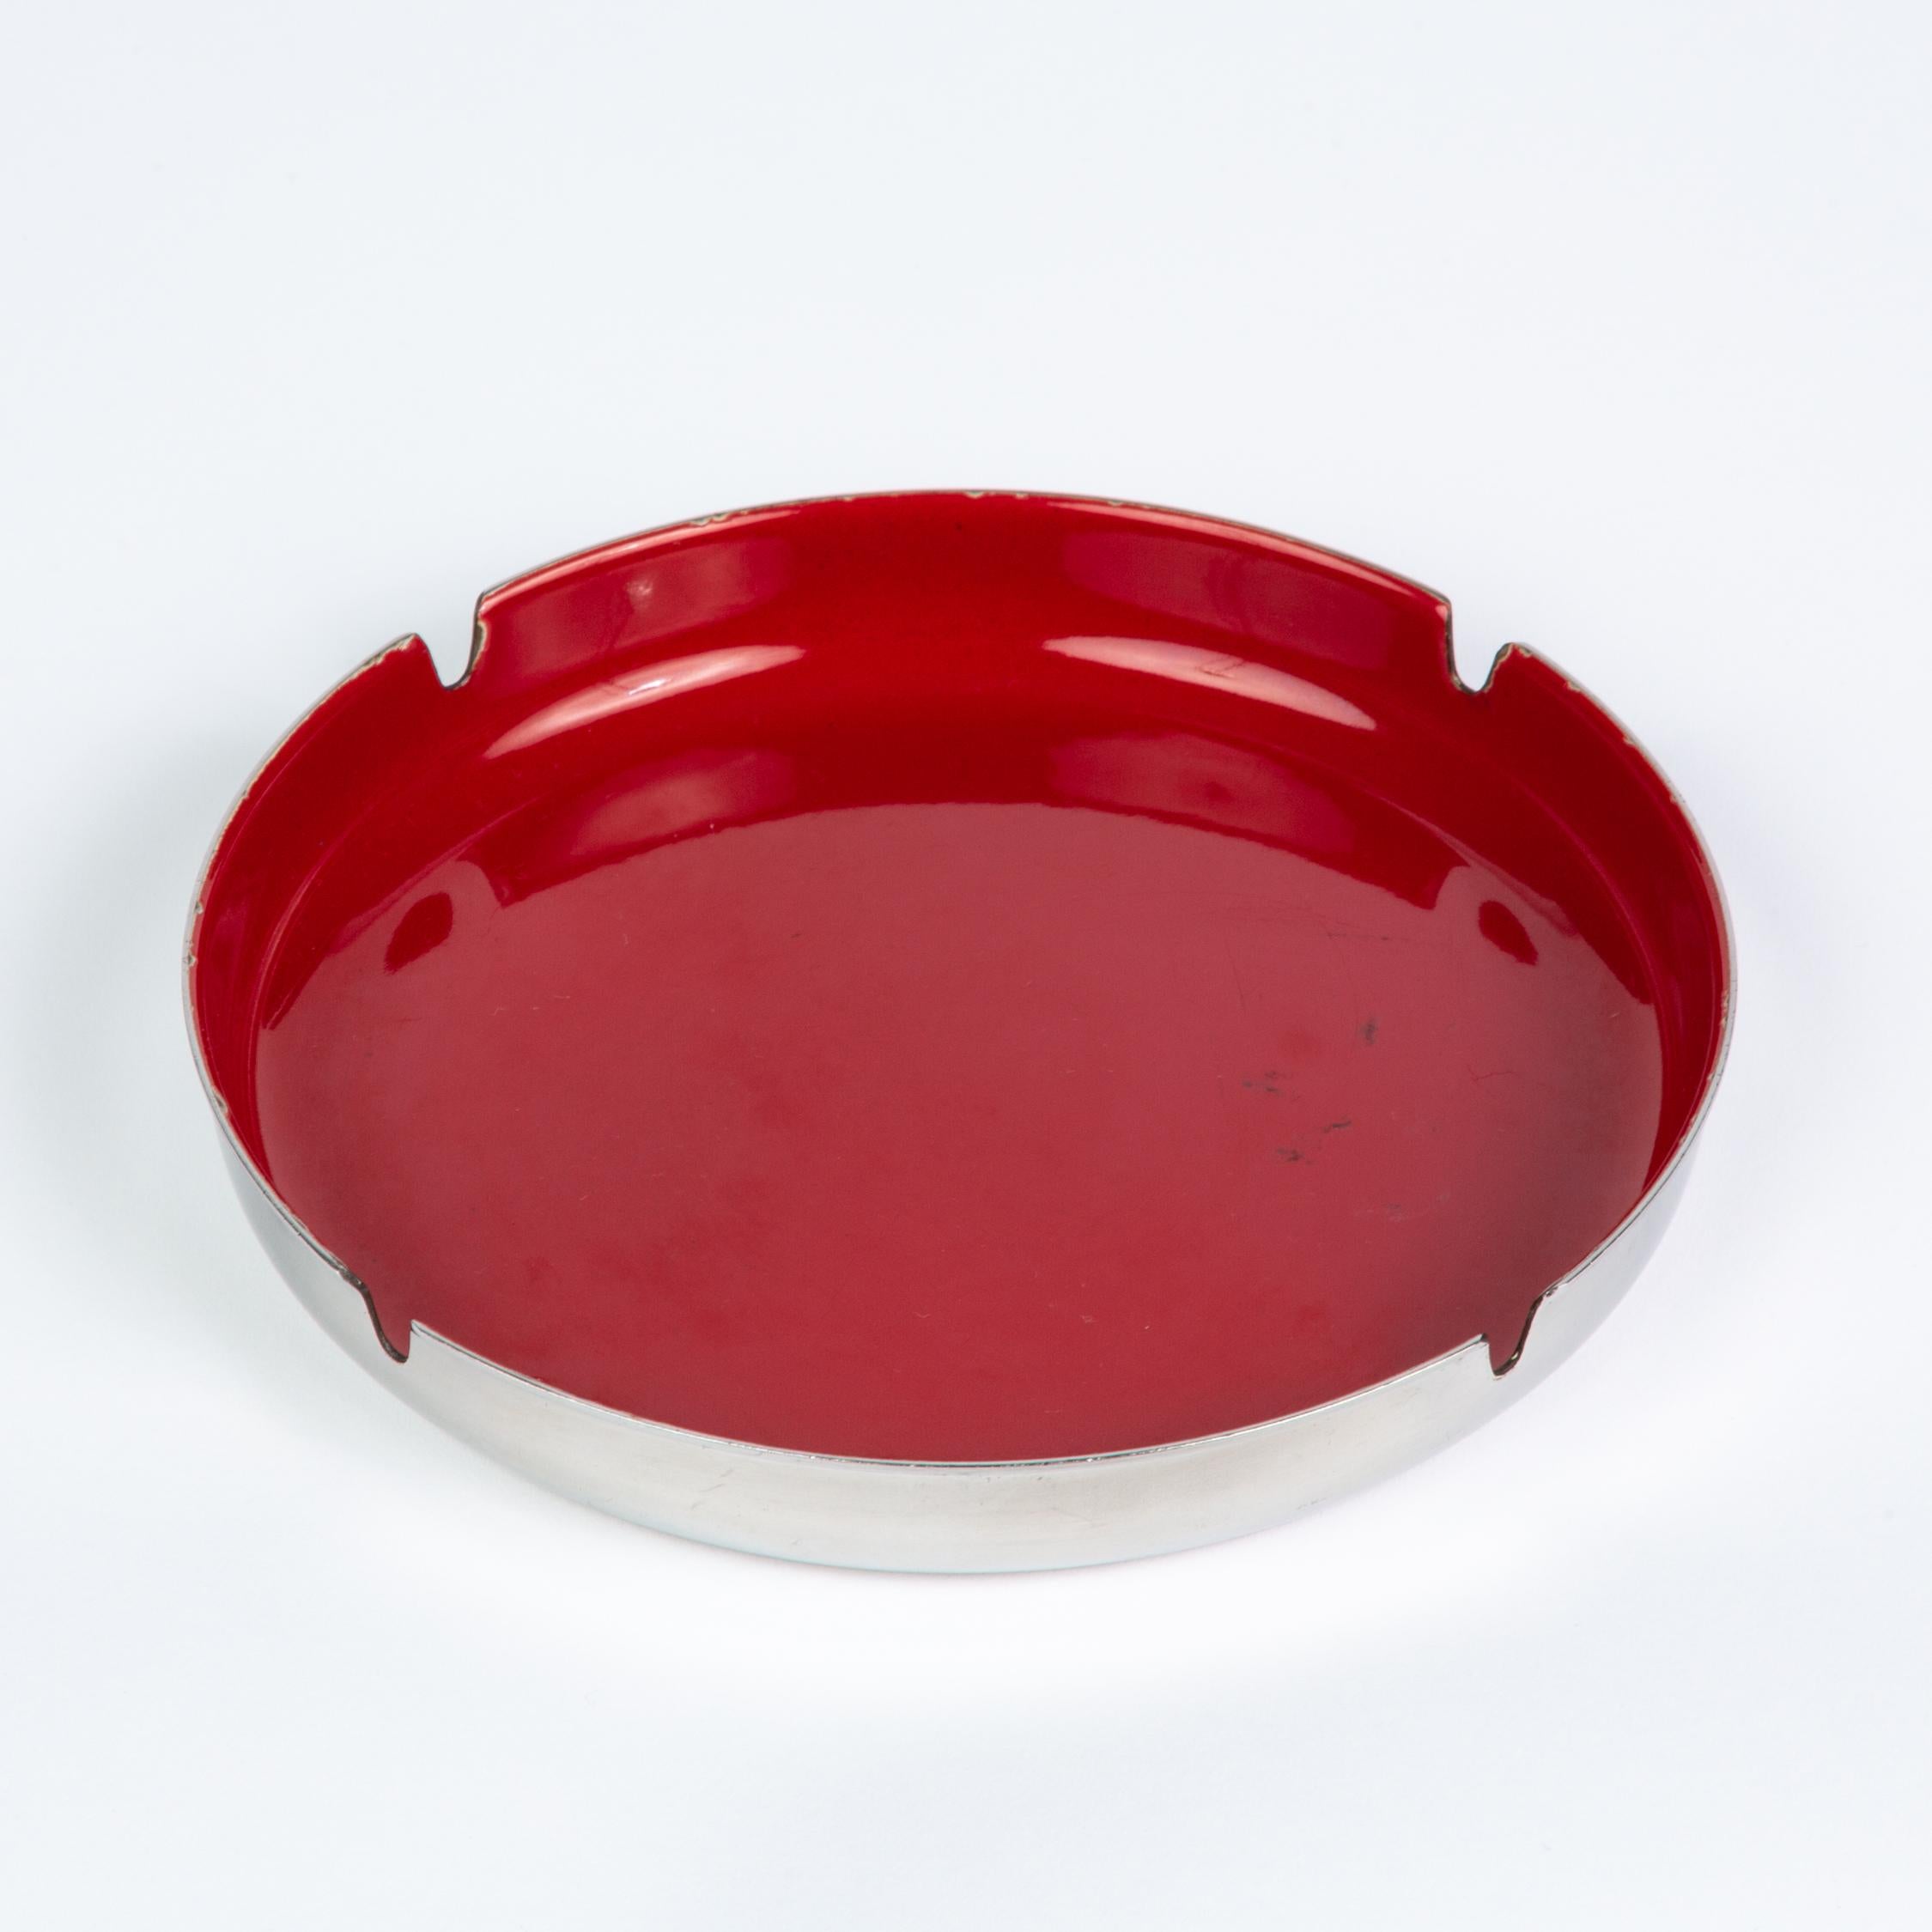 A round ashtray from Norwegian homewares manufacturer Leif Wessmann, who produced a number of ashtray models in the 1950s and 1960s which were retailed in the US at Knoll showrooms. The stainless steel vessel has a flat foot and slightly flared